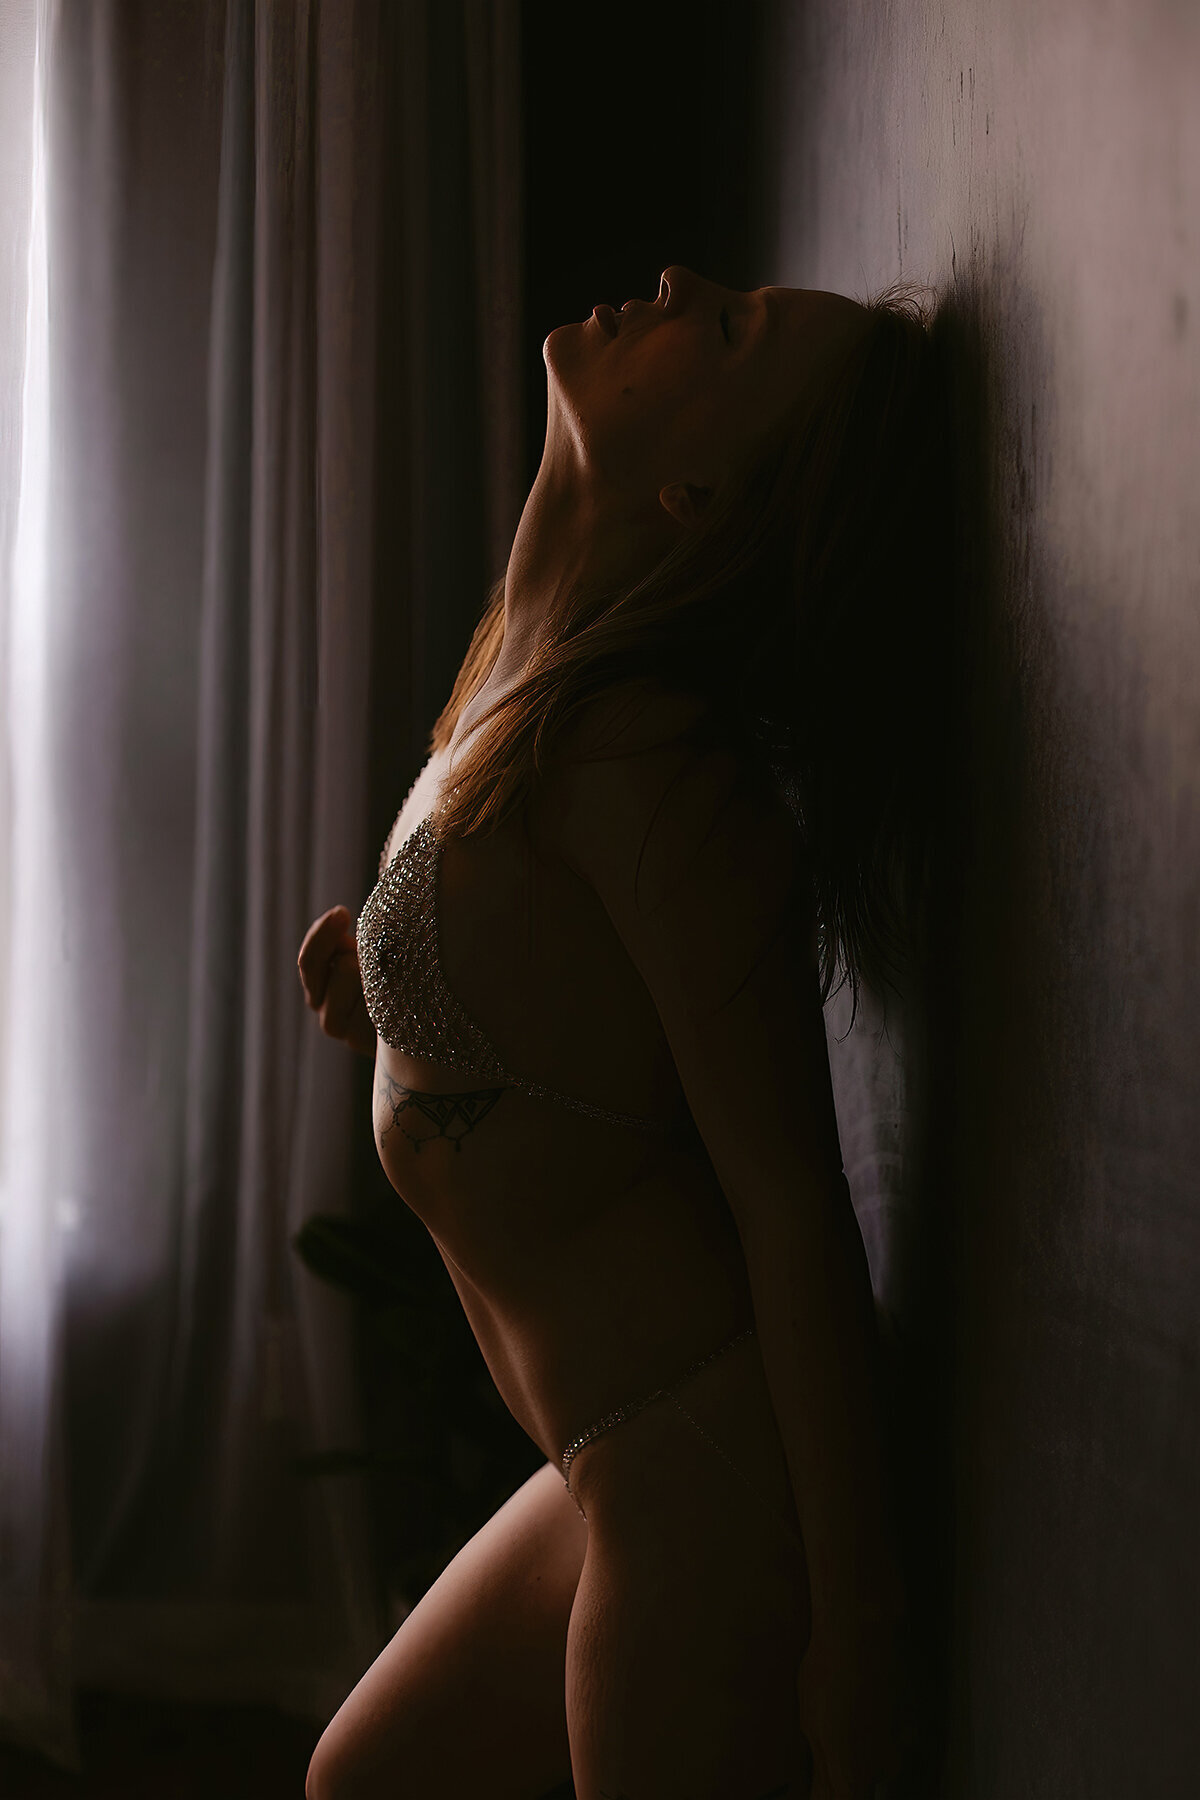 A woman in crystal lingerie leans seductively against a wall in a Bentonville boudoir photoshoot.